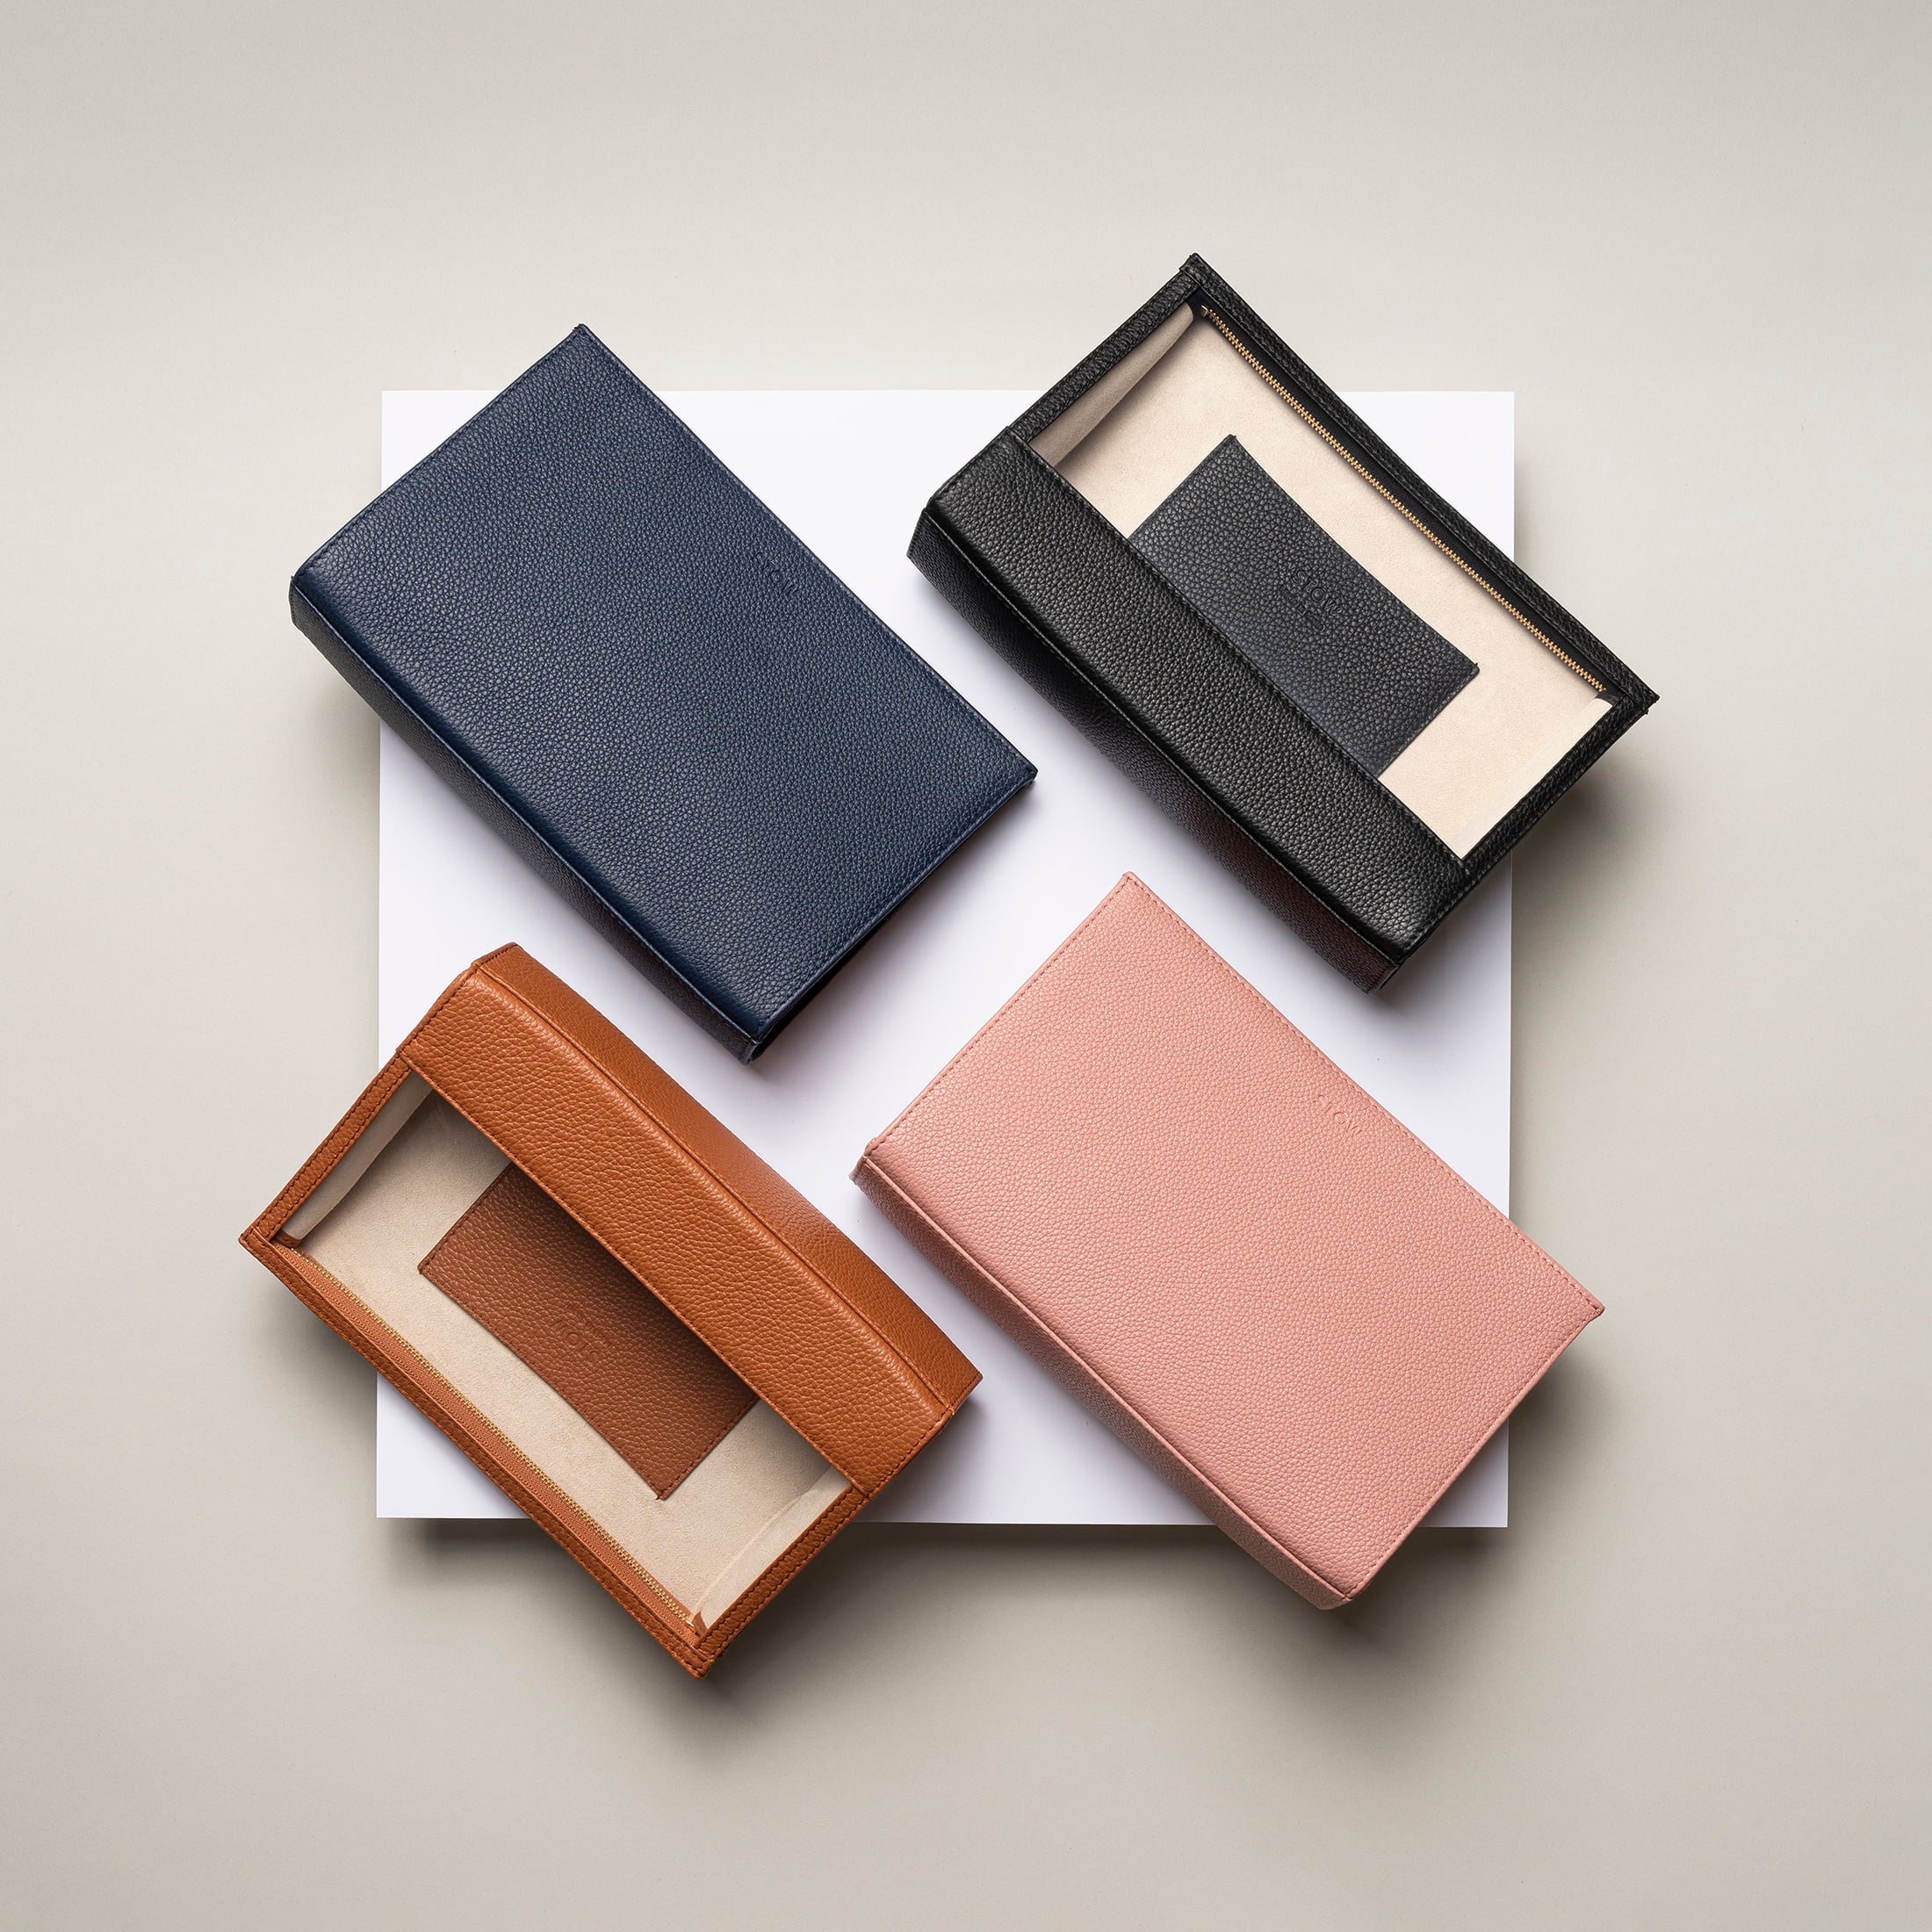 Collection of STOW Seeview Onboards in Hazy Blush, Navy, Earth Tan and Black.